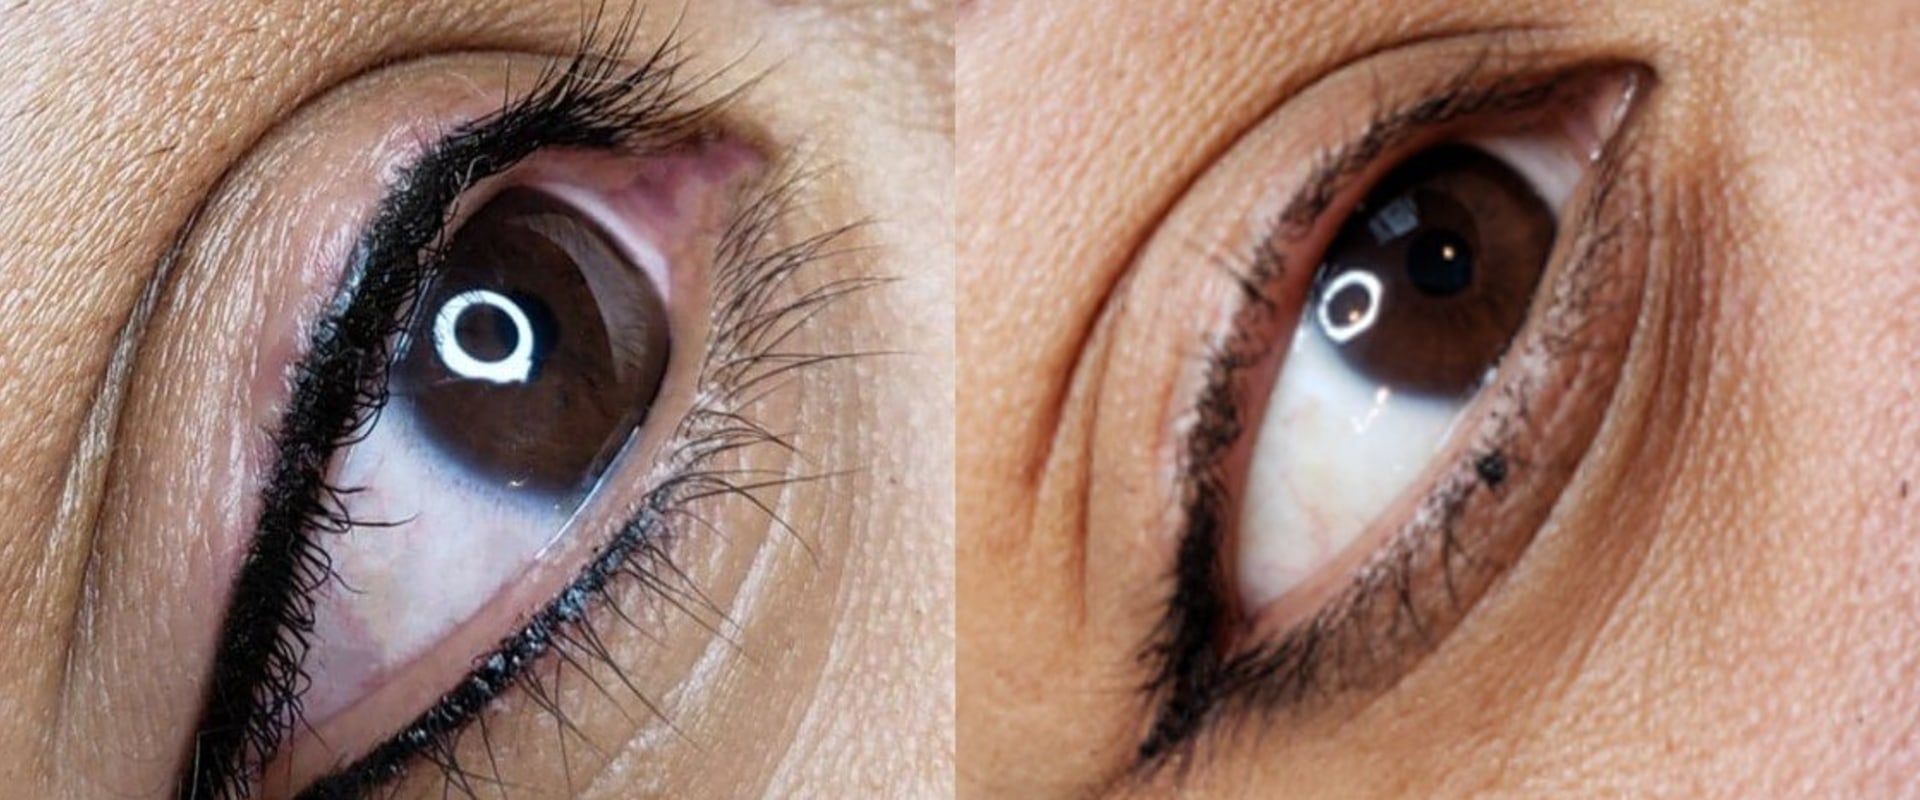 Will the permanent eyeliner completely fade?